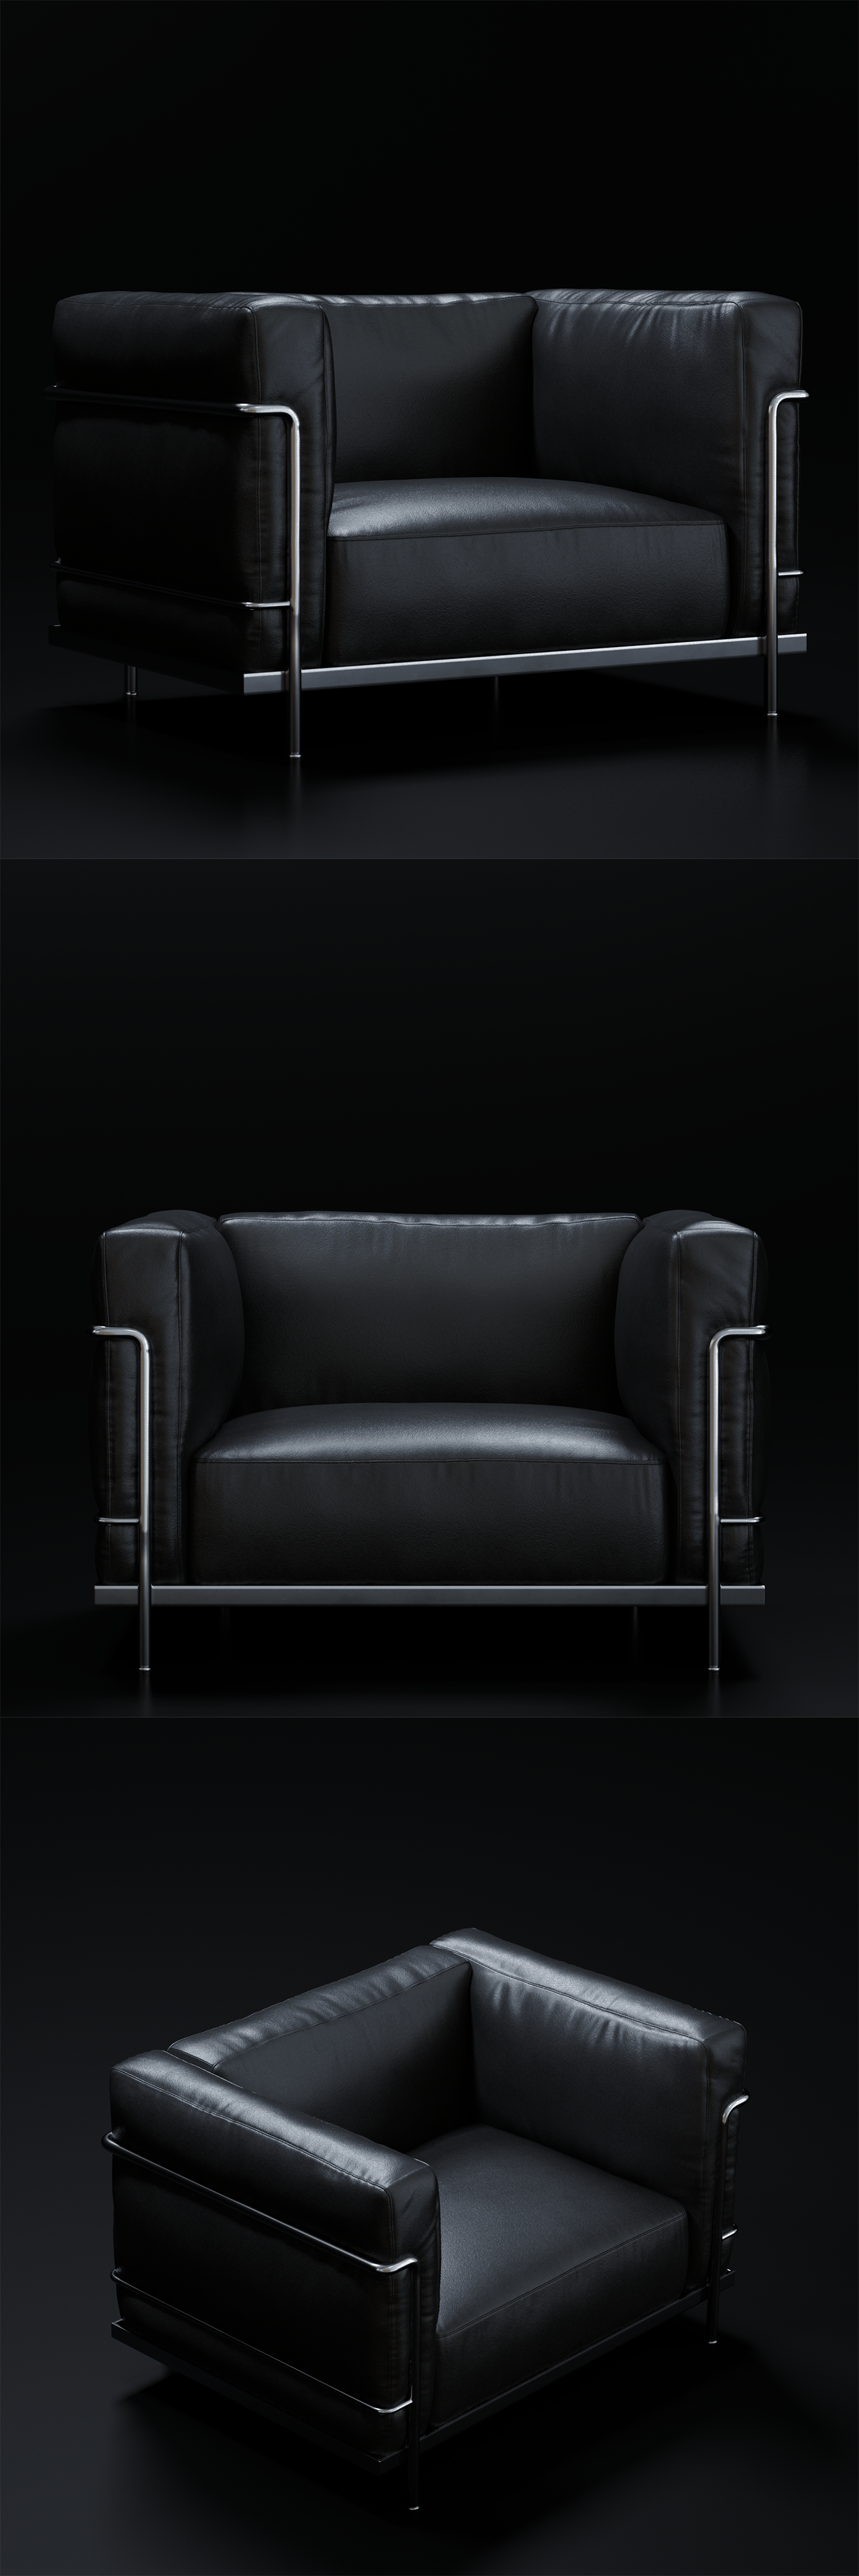 armchair CGI chair Ecommerce Interior photoreal presentation product design  product visualization Render